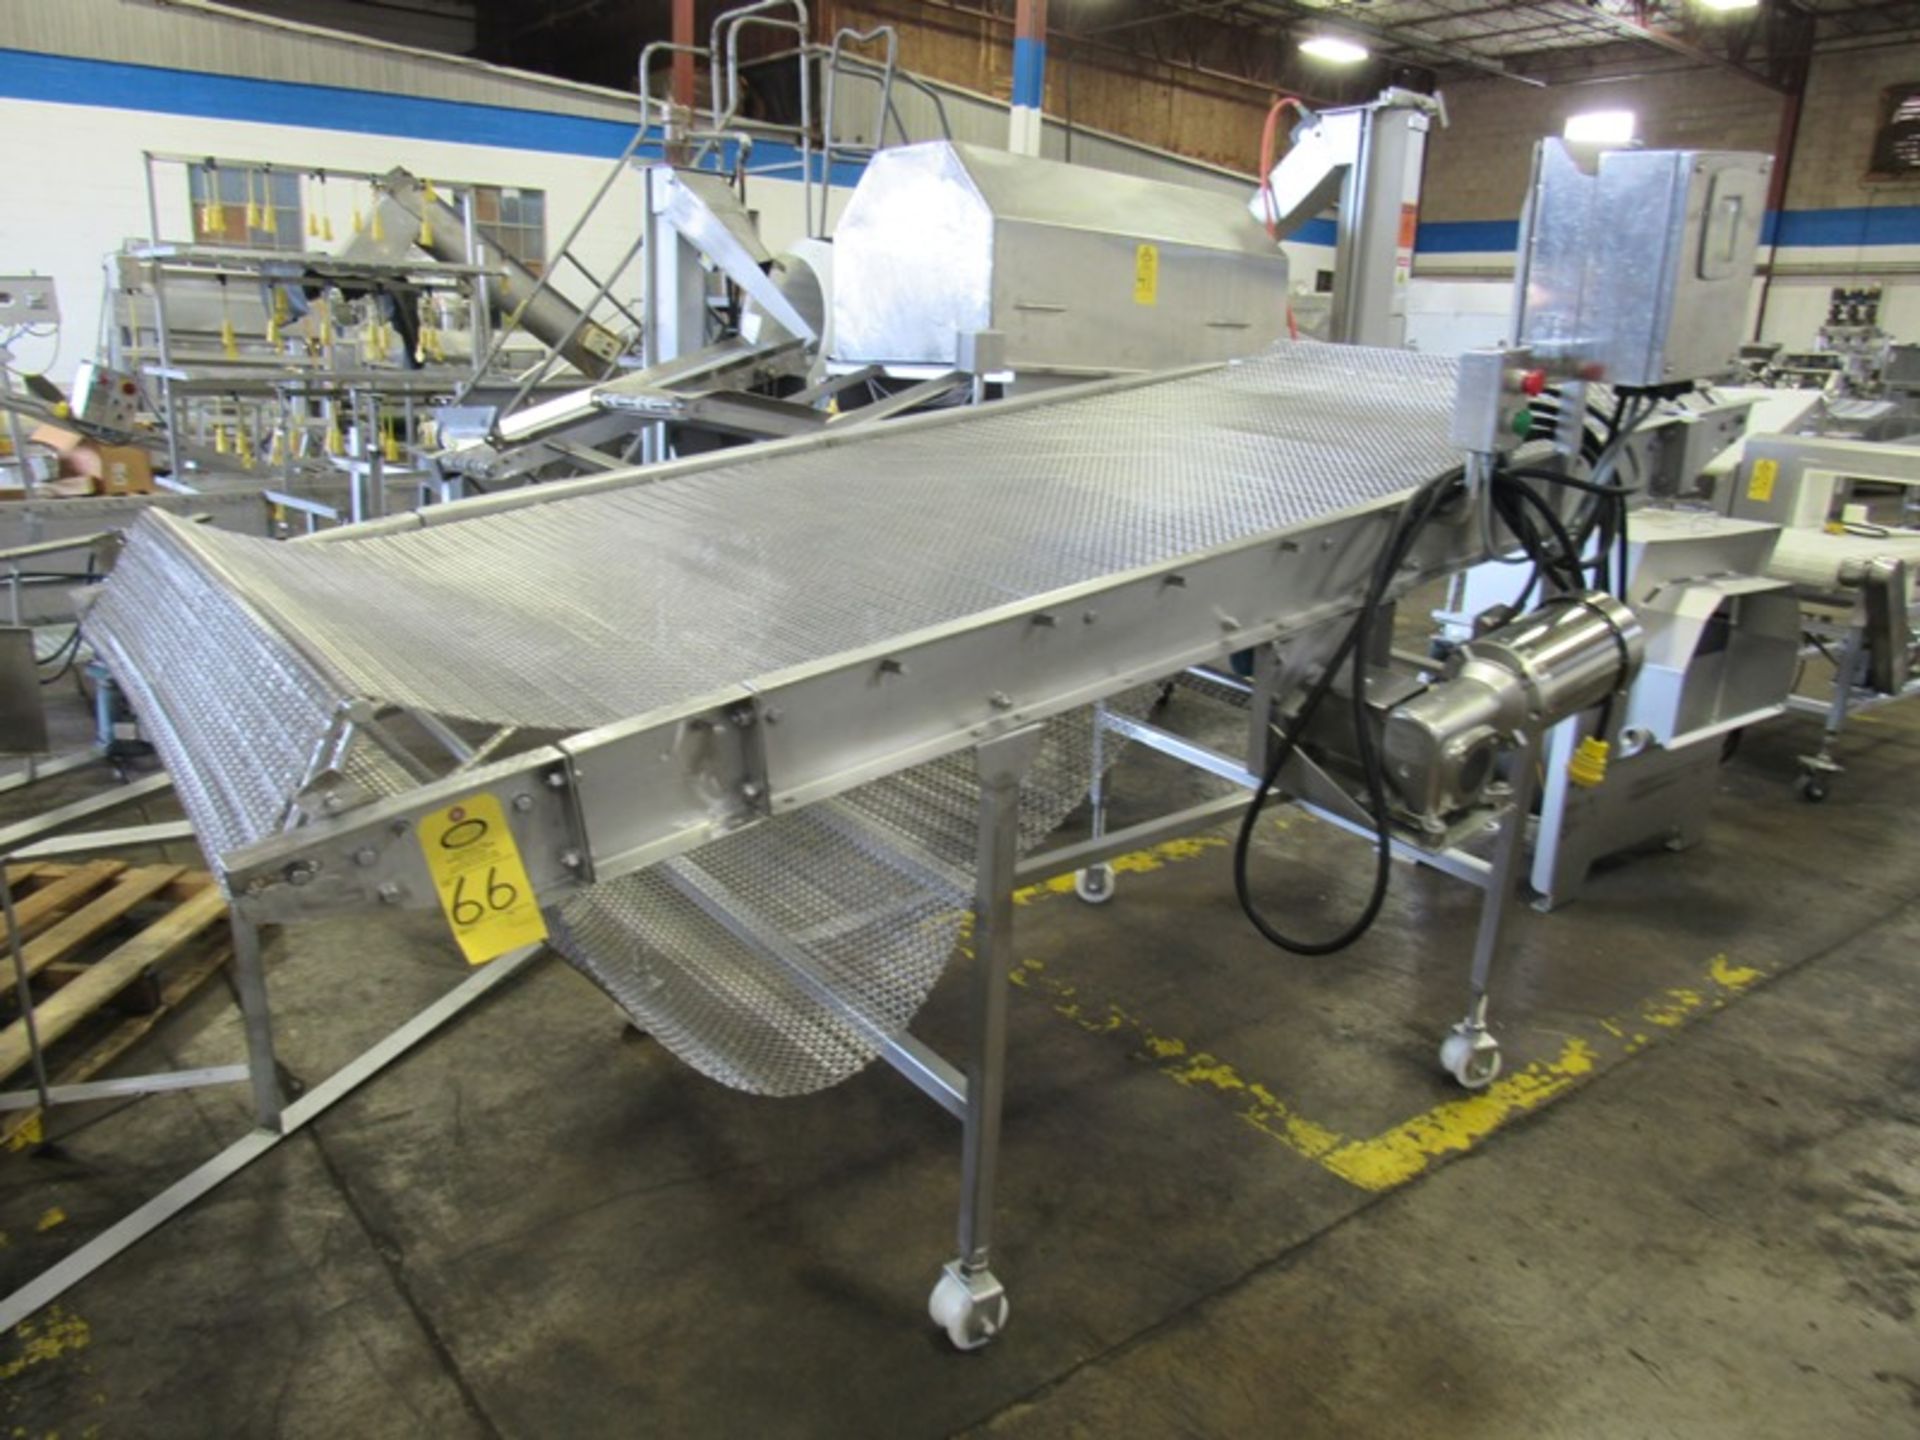 Stainless Steel Conveyor, 41 1/2" W X 10' L stainless steel mesh belt, 230/460 volt, stainless steel